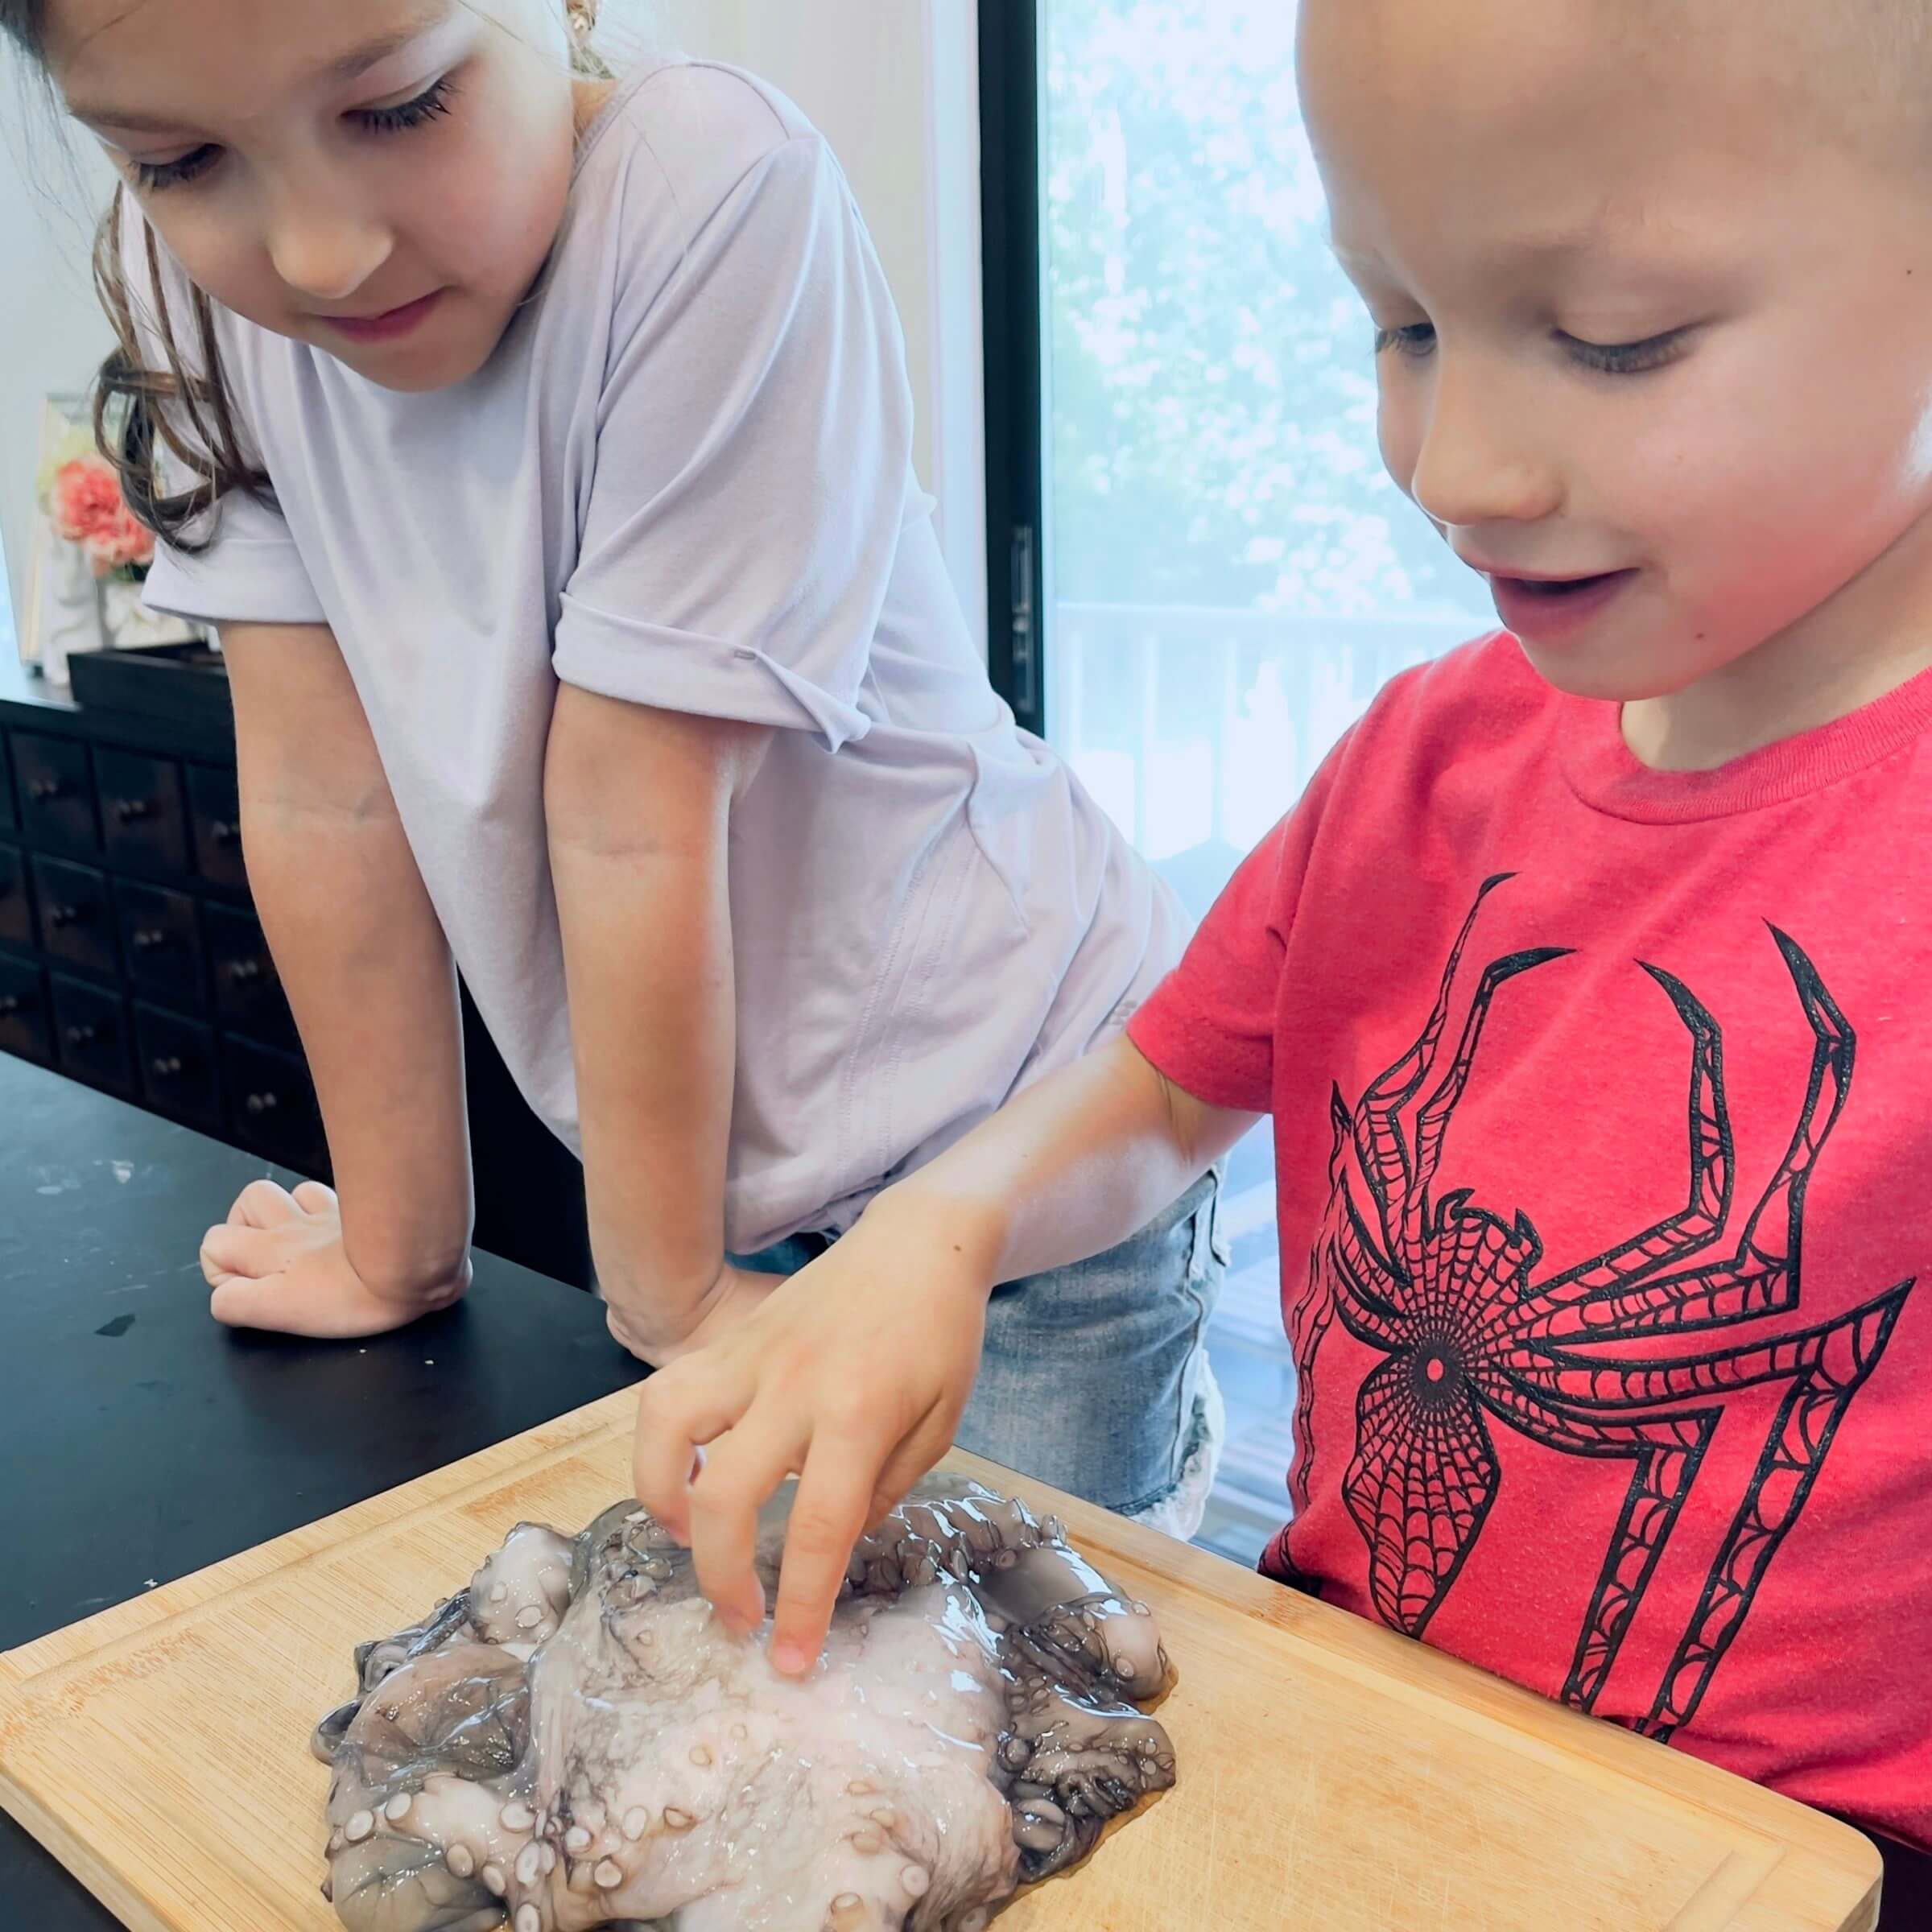 Michael Kummer's son and daughter looking at an octopus that's about to be cooked for a meal.